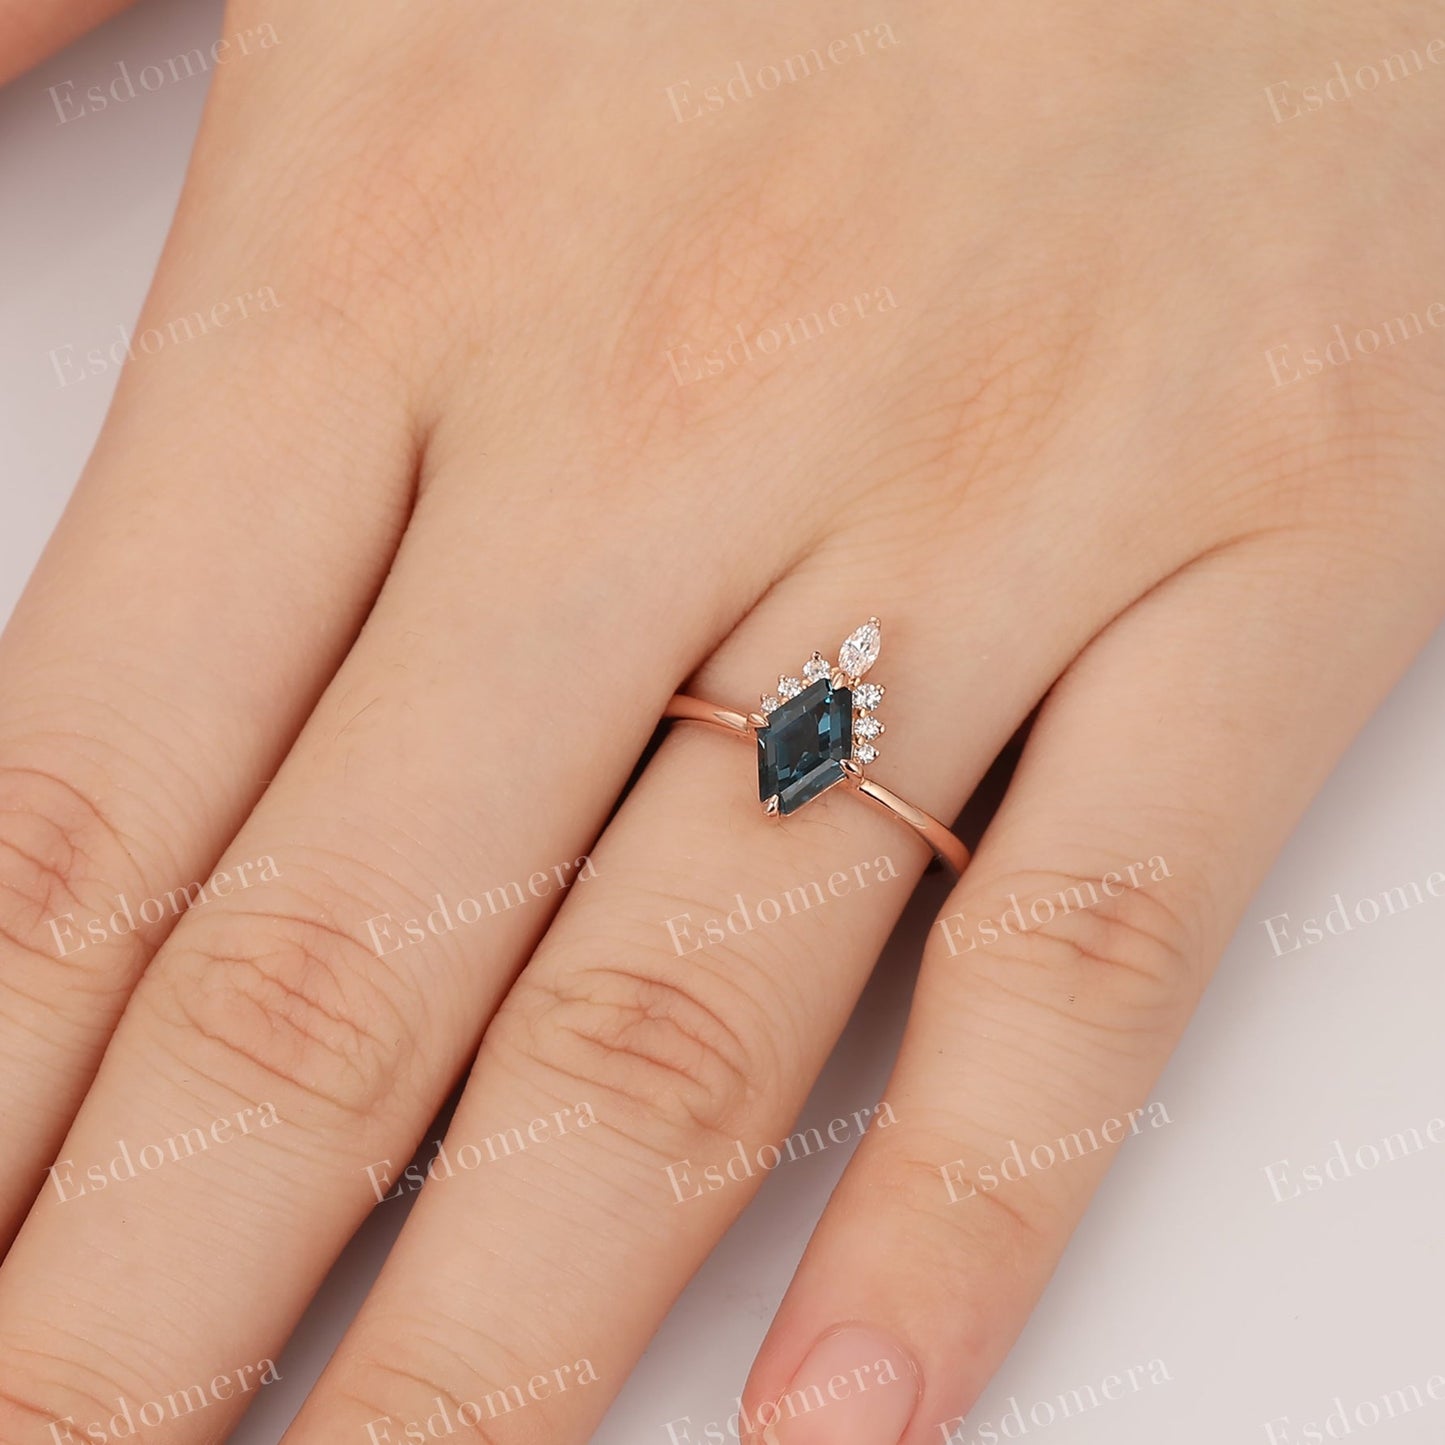 Long Hexagon Cut 6x8mm London Blue Topaz Wedding Ring, Unique Engagement Ring For Her